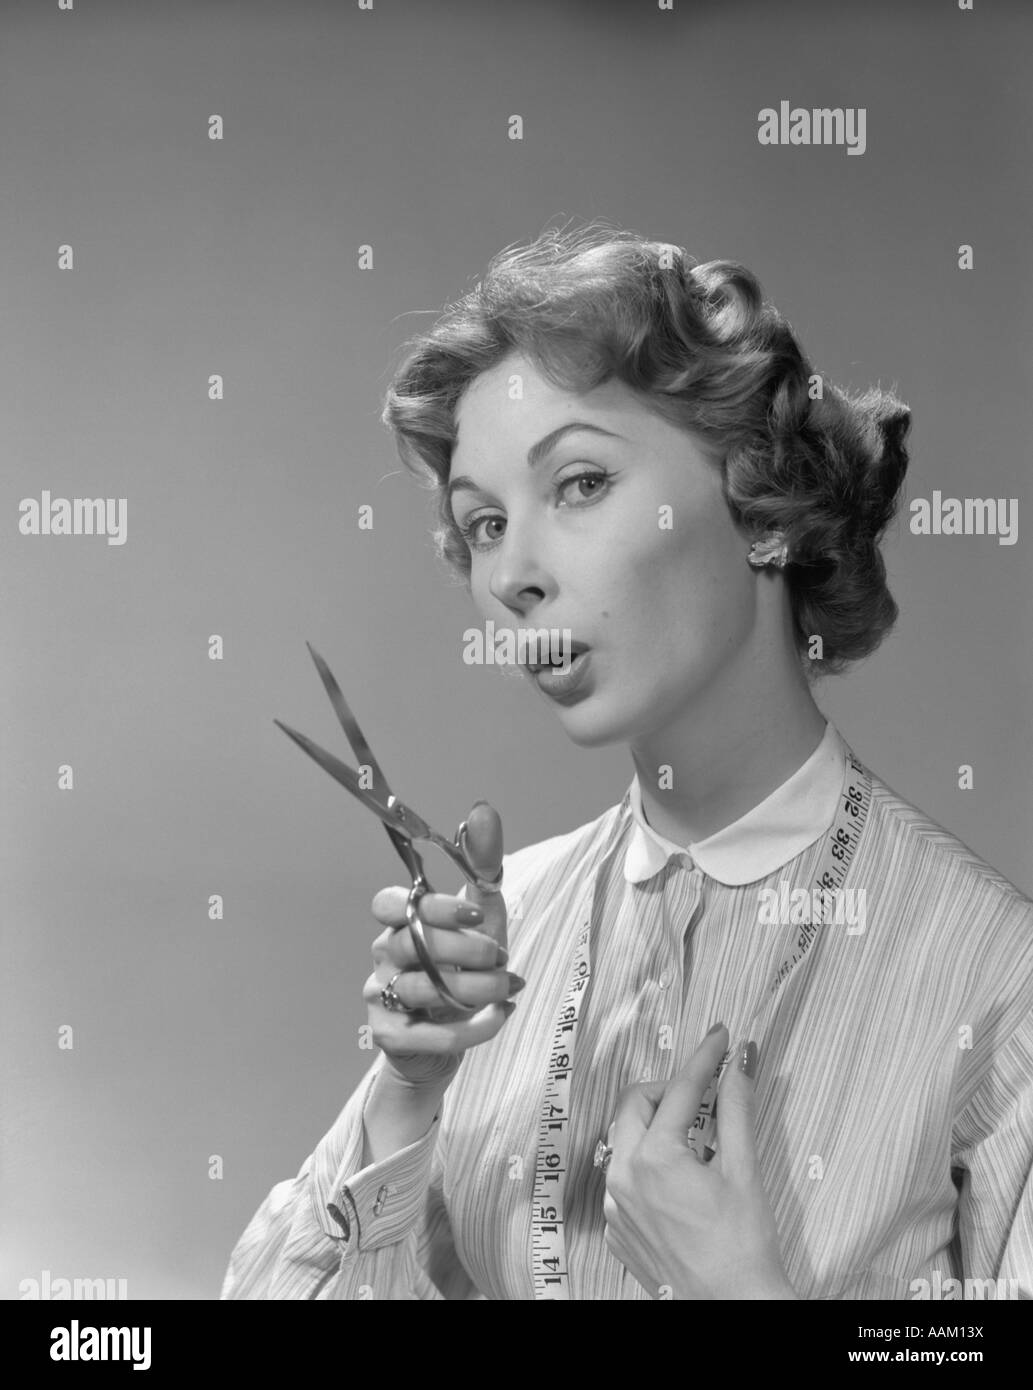 1950s 1960s PORTRAIT WOMAN HOLDING SCISSORS AND MEASURING TAPE LOOKING AT CAMERA Stock Photo